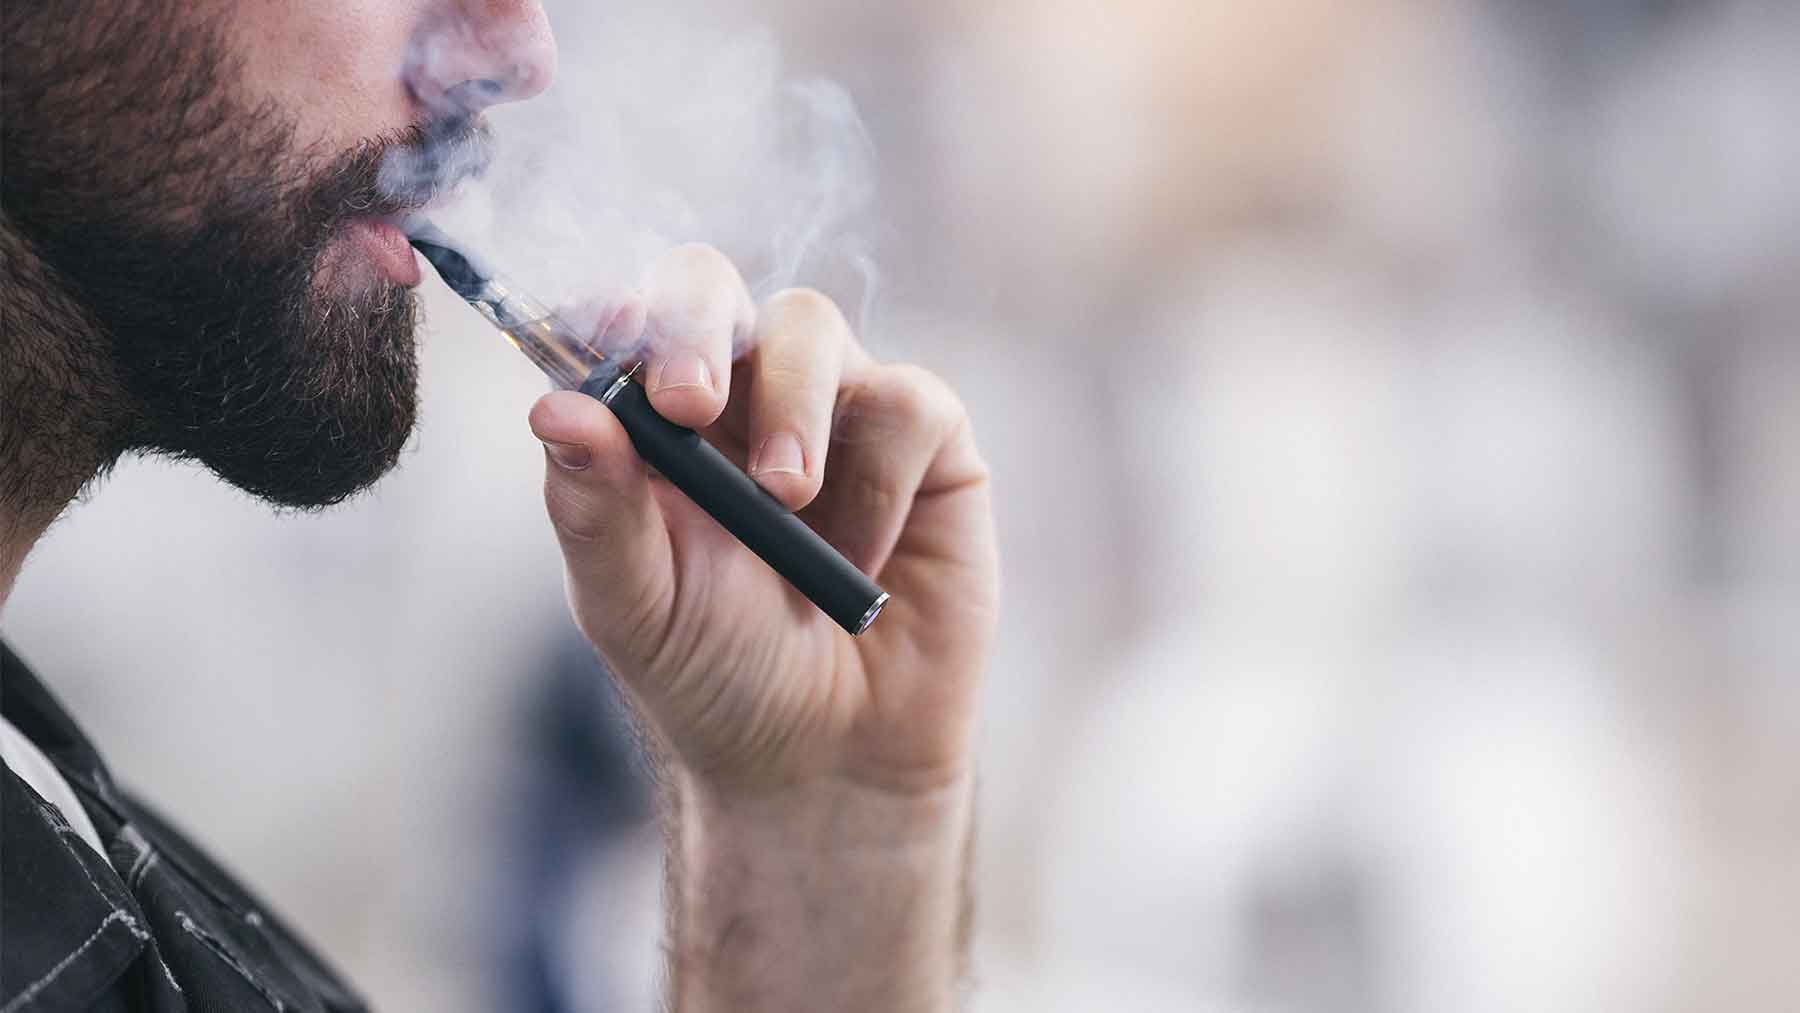 A Breath of Fresh Air: Vaping's Positive Impact on Smokers